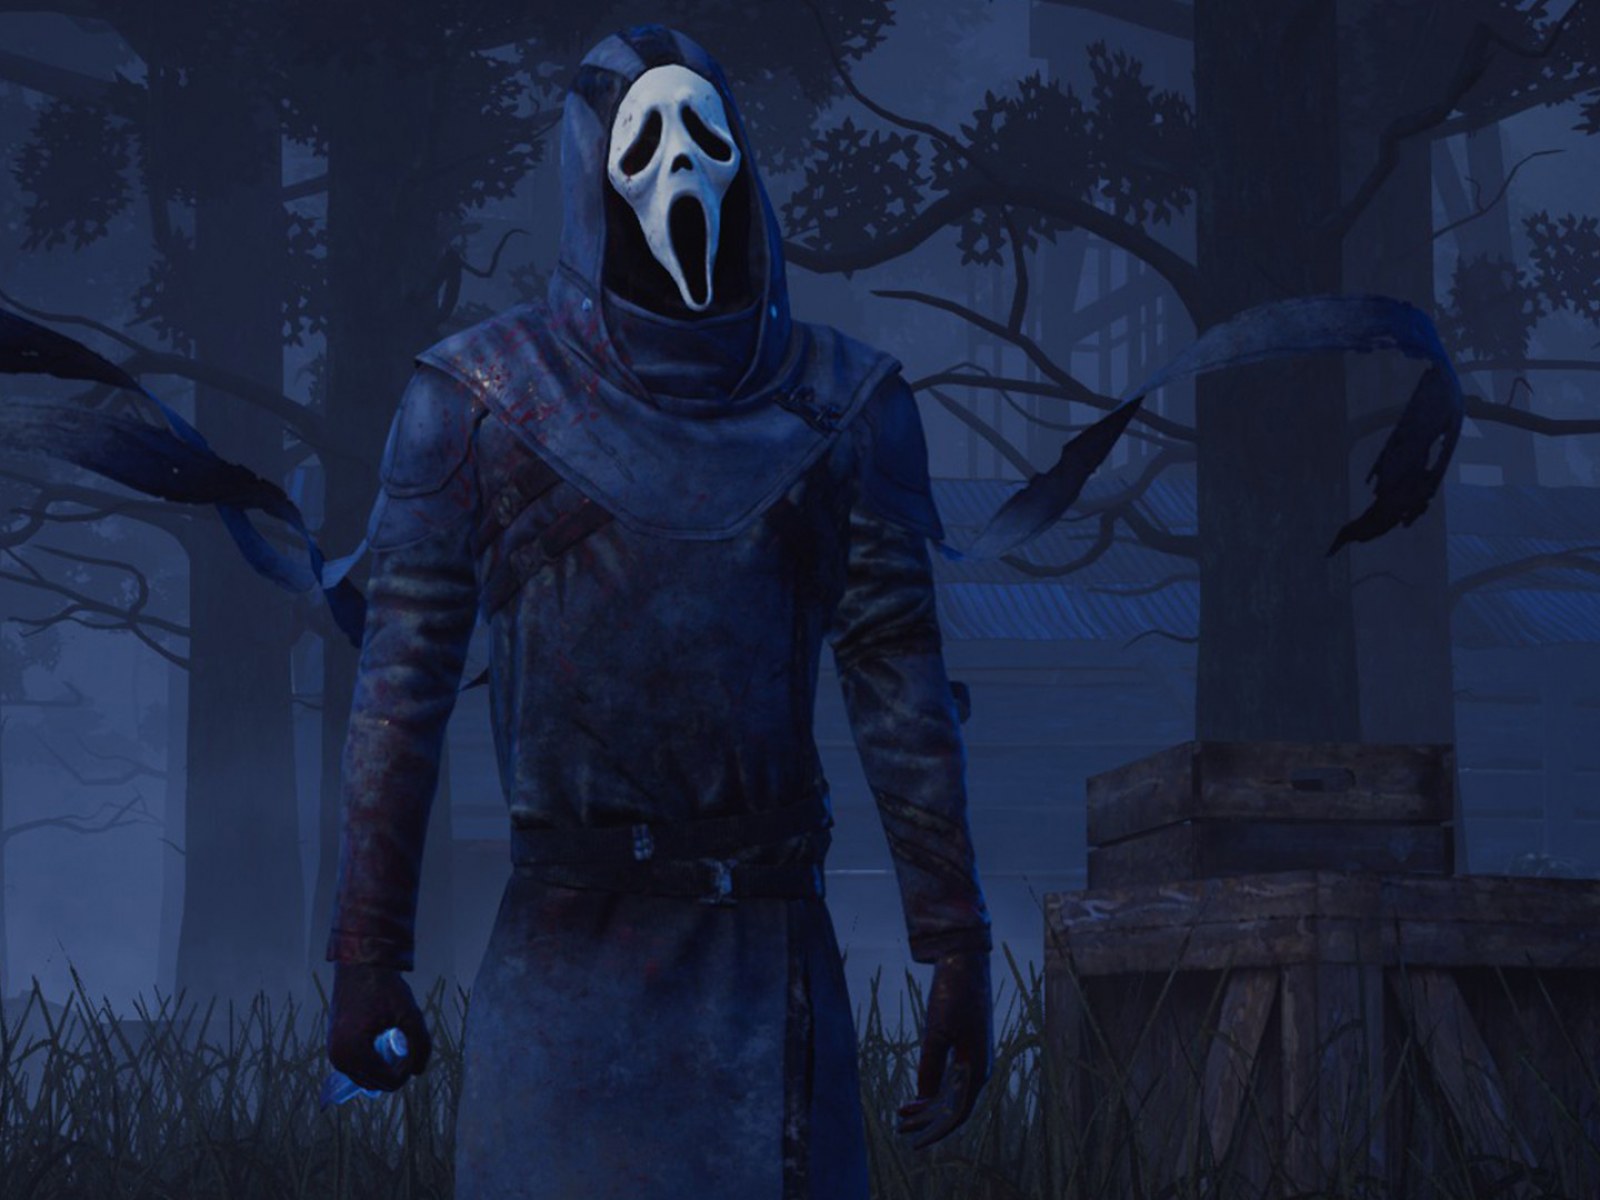 Dead By Daylight Nintendo Switch Includes 9 Killers Michael Myers And The Demogorgon Downloadable